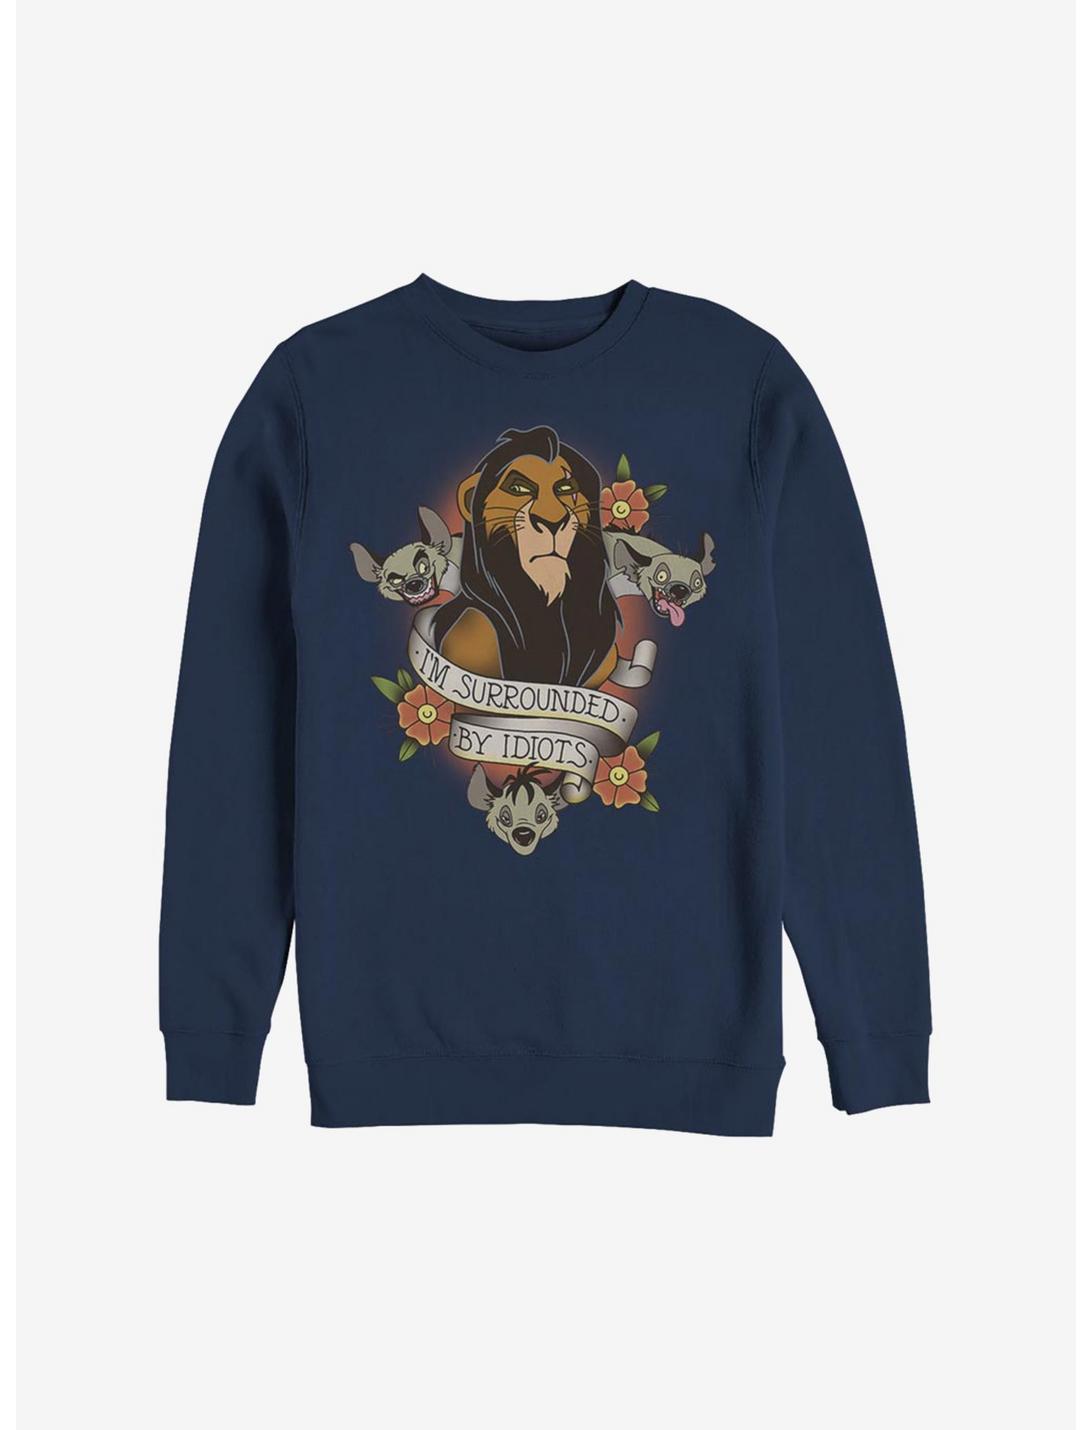 Plus Size Disney The Lion King Surrounded By Idiots Sweatshirt, NAVY, hi-res